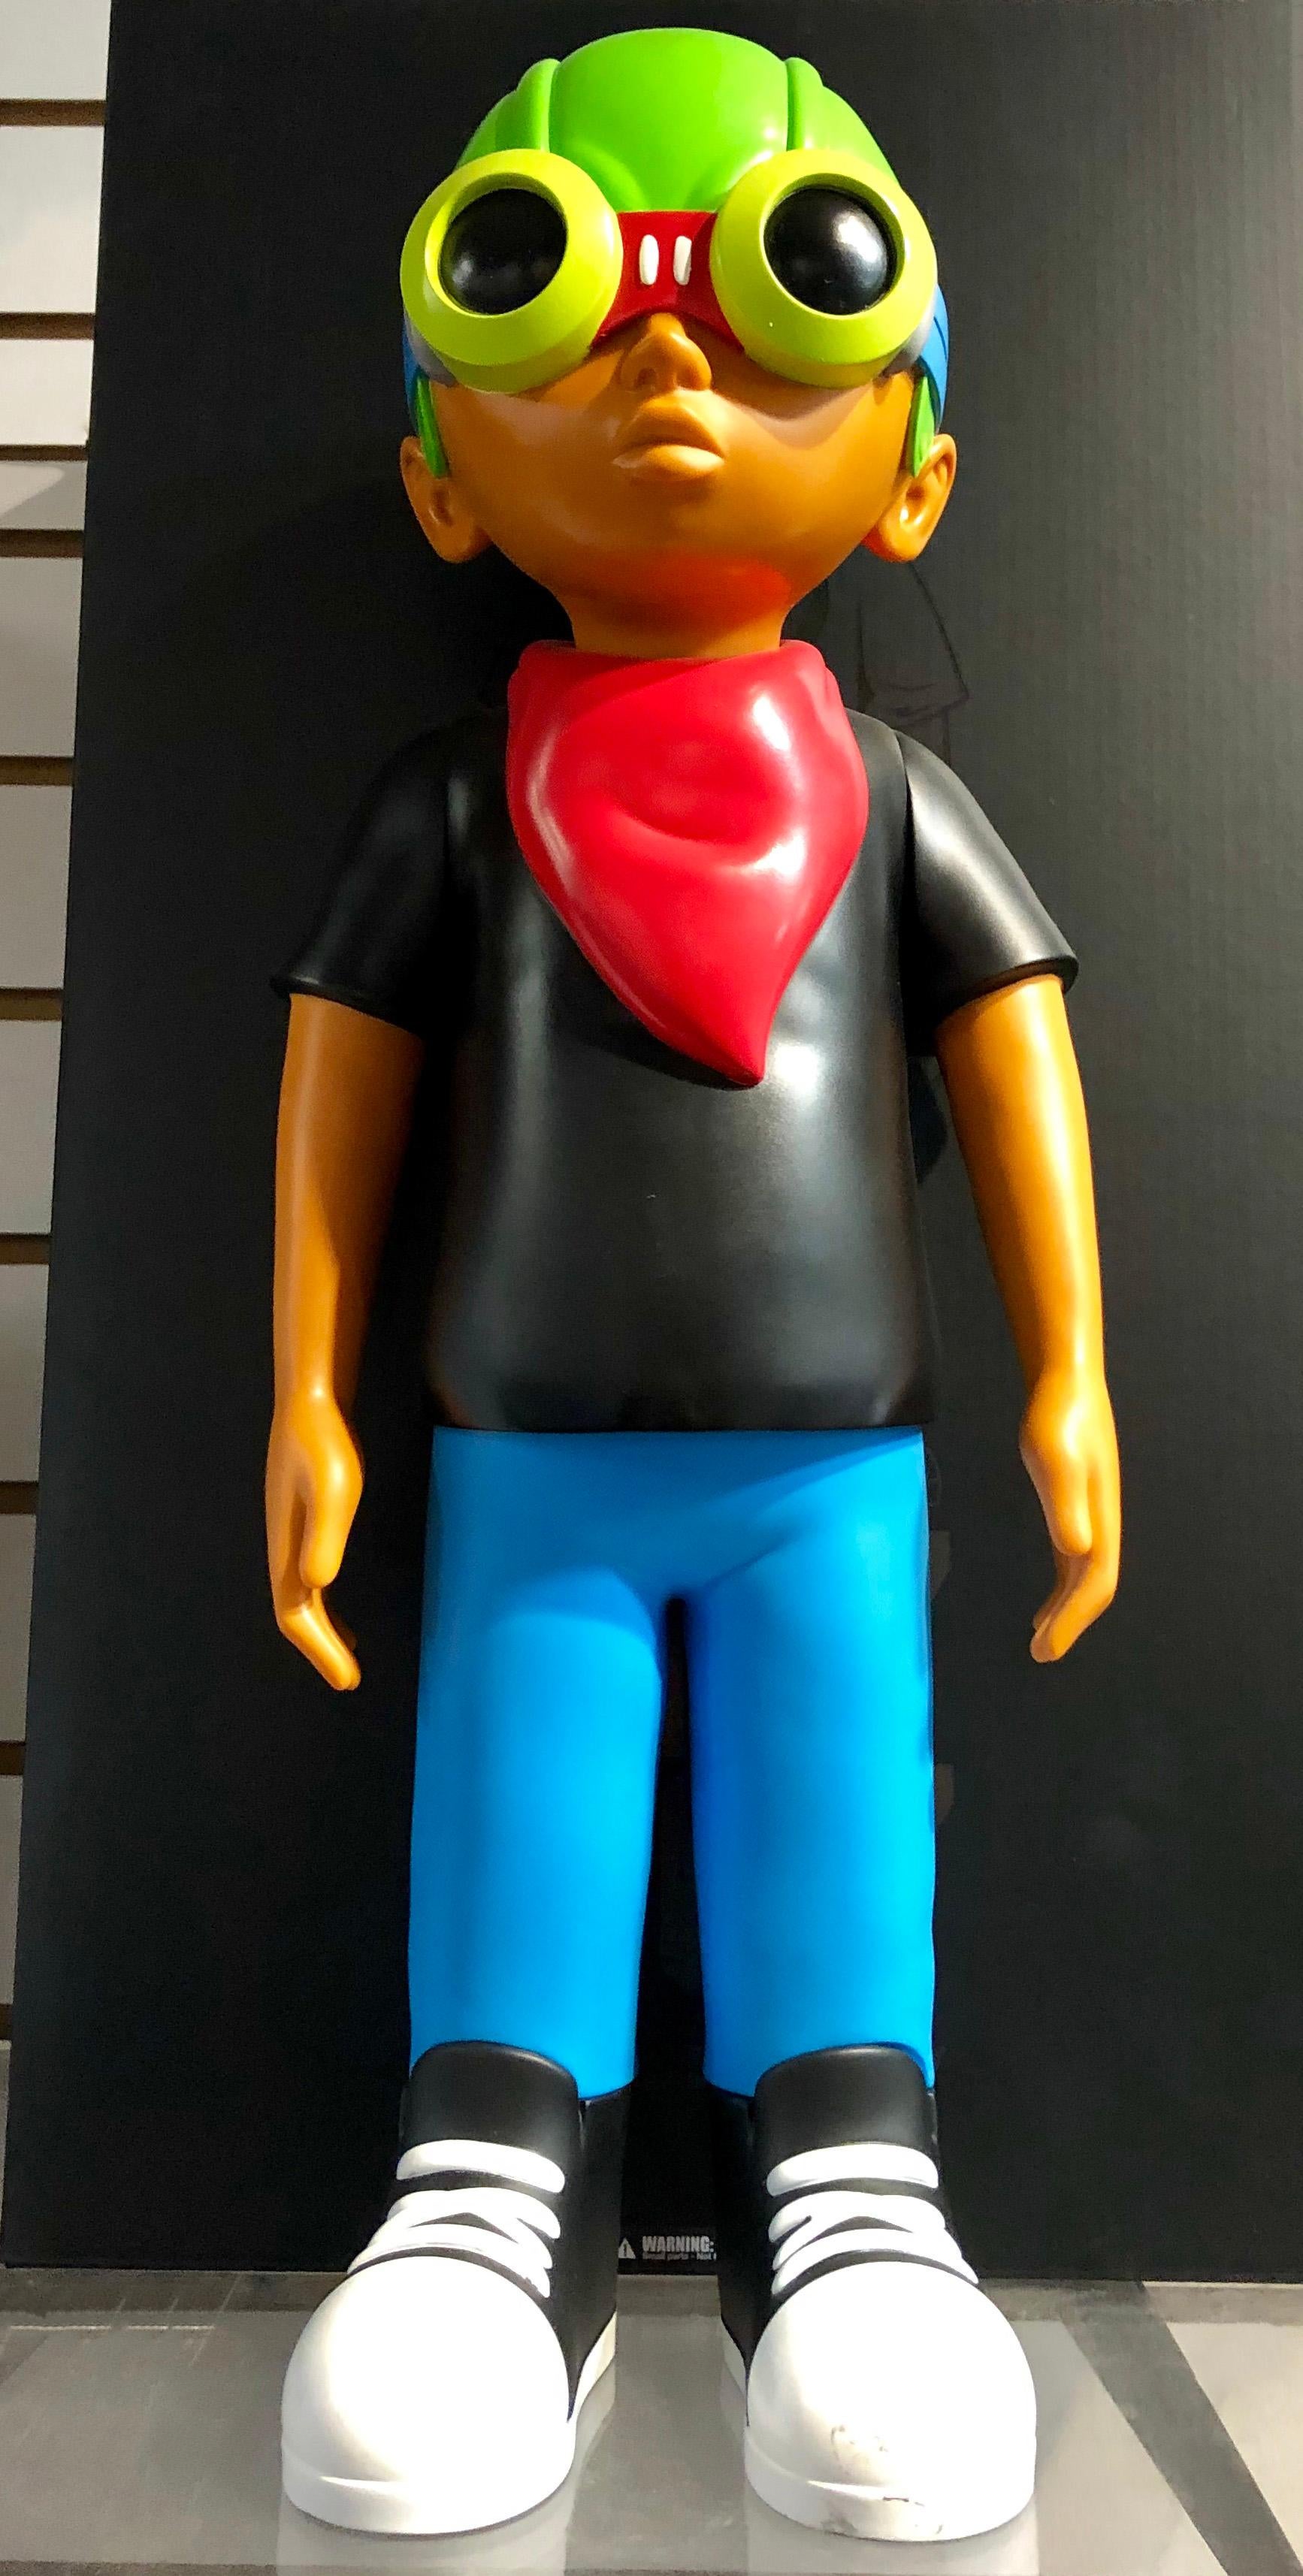 Hebru Brantley 18 inch Flyboy, 2018. New with its original box. 

Medium: Painted Cast Vinyl
Year: 2018
Dimensions: 18 x 7 x 5 inches  
New in its original packaging  
From a sold out un-numbered edition
Authenticity guaranteed. Stamped on underside